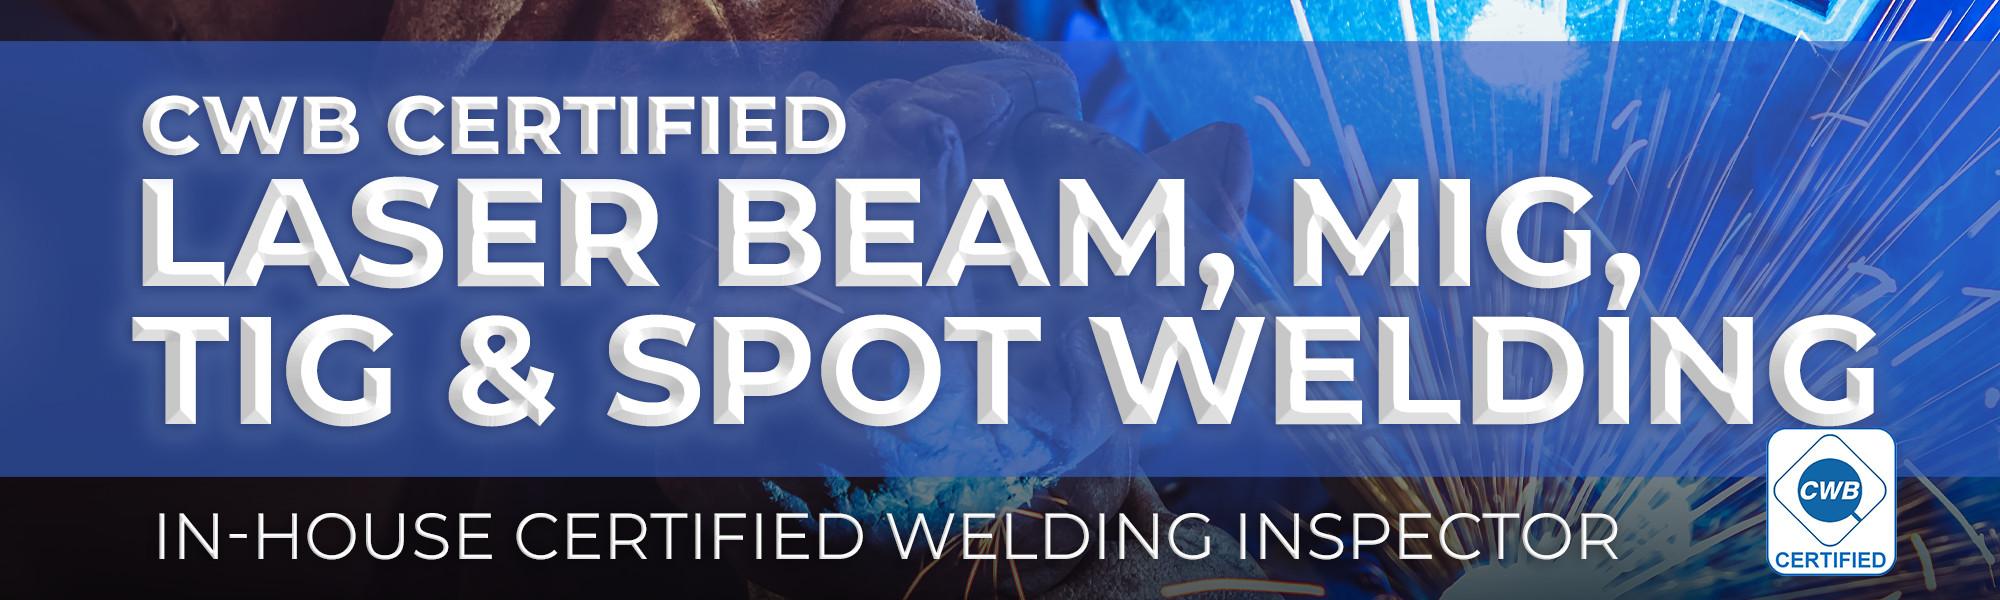 CWB certified MIG, TIG, and spot welding. In-house certified welding inspector.